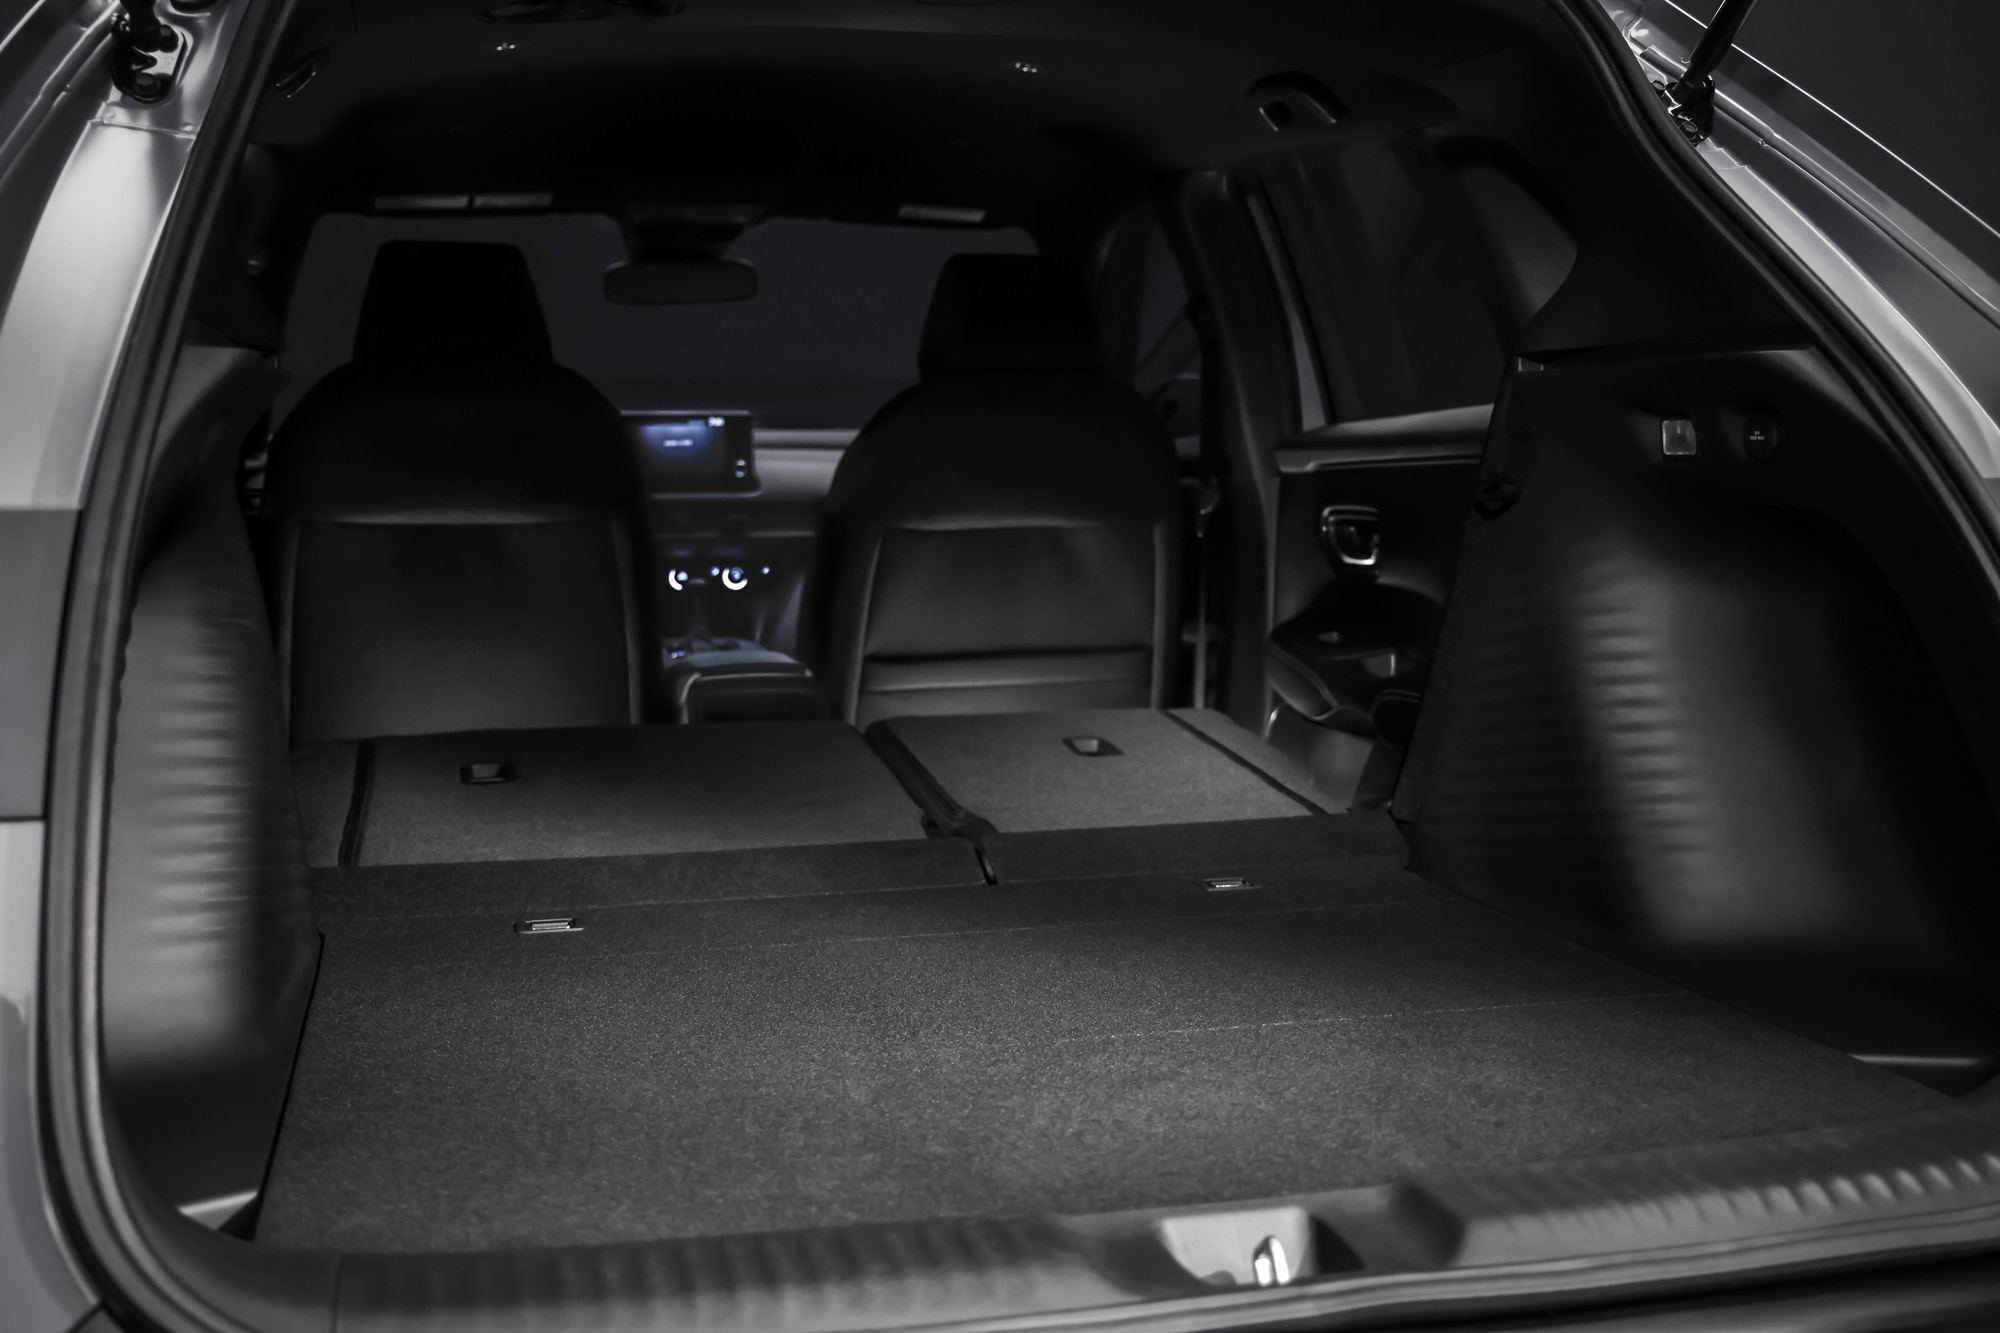 2023 Honda HR-V cargo space with seats down